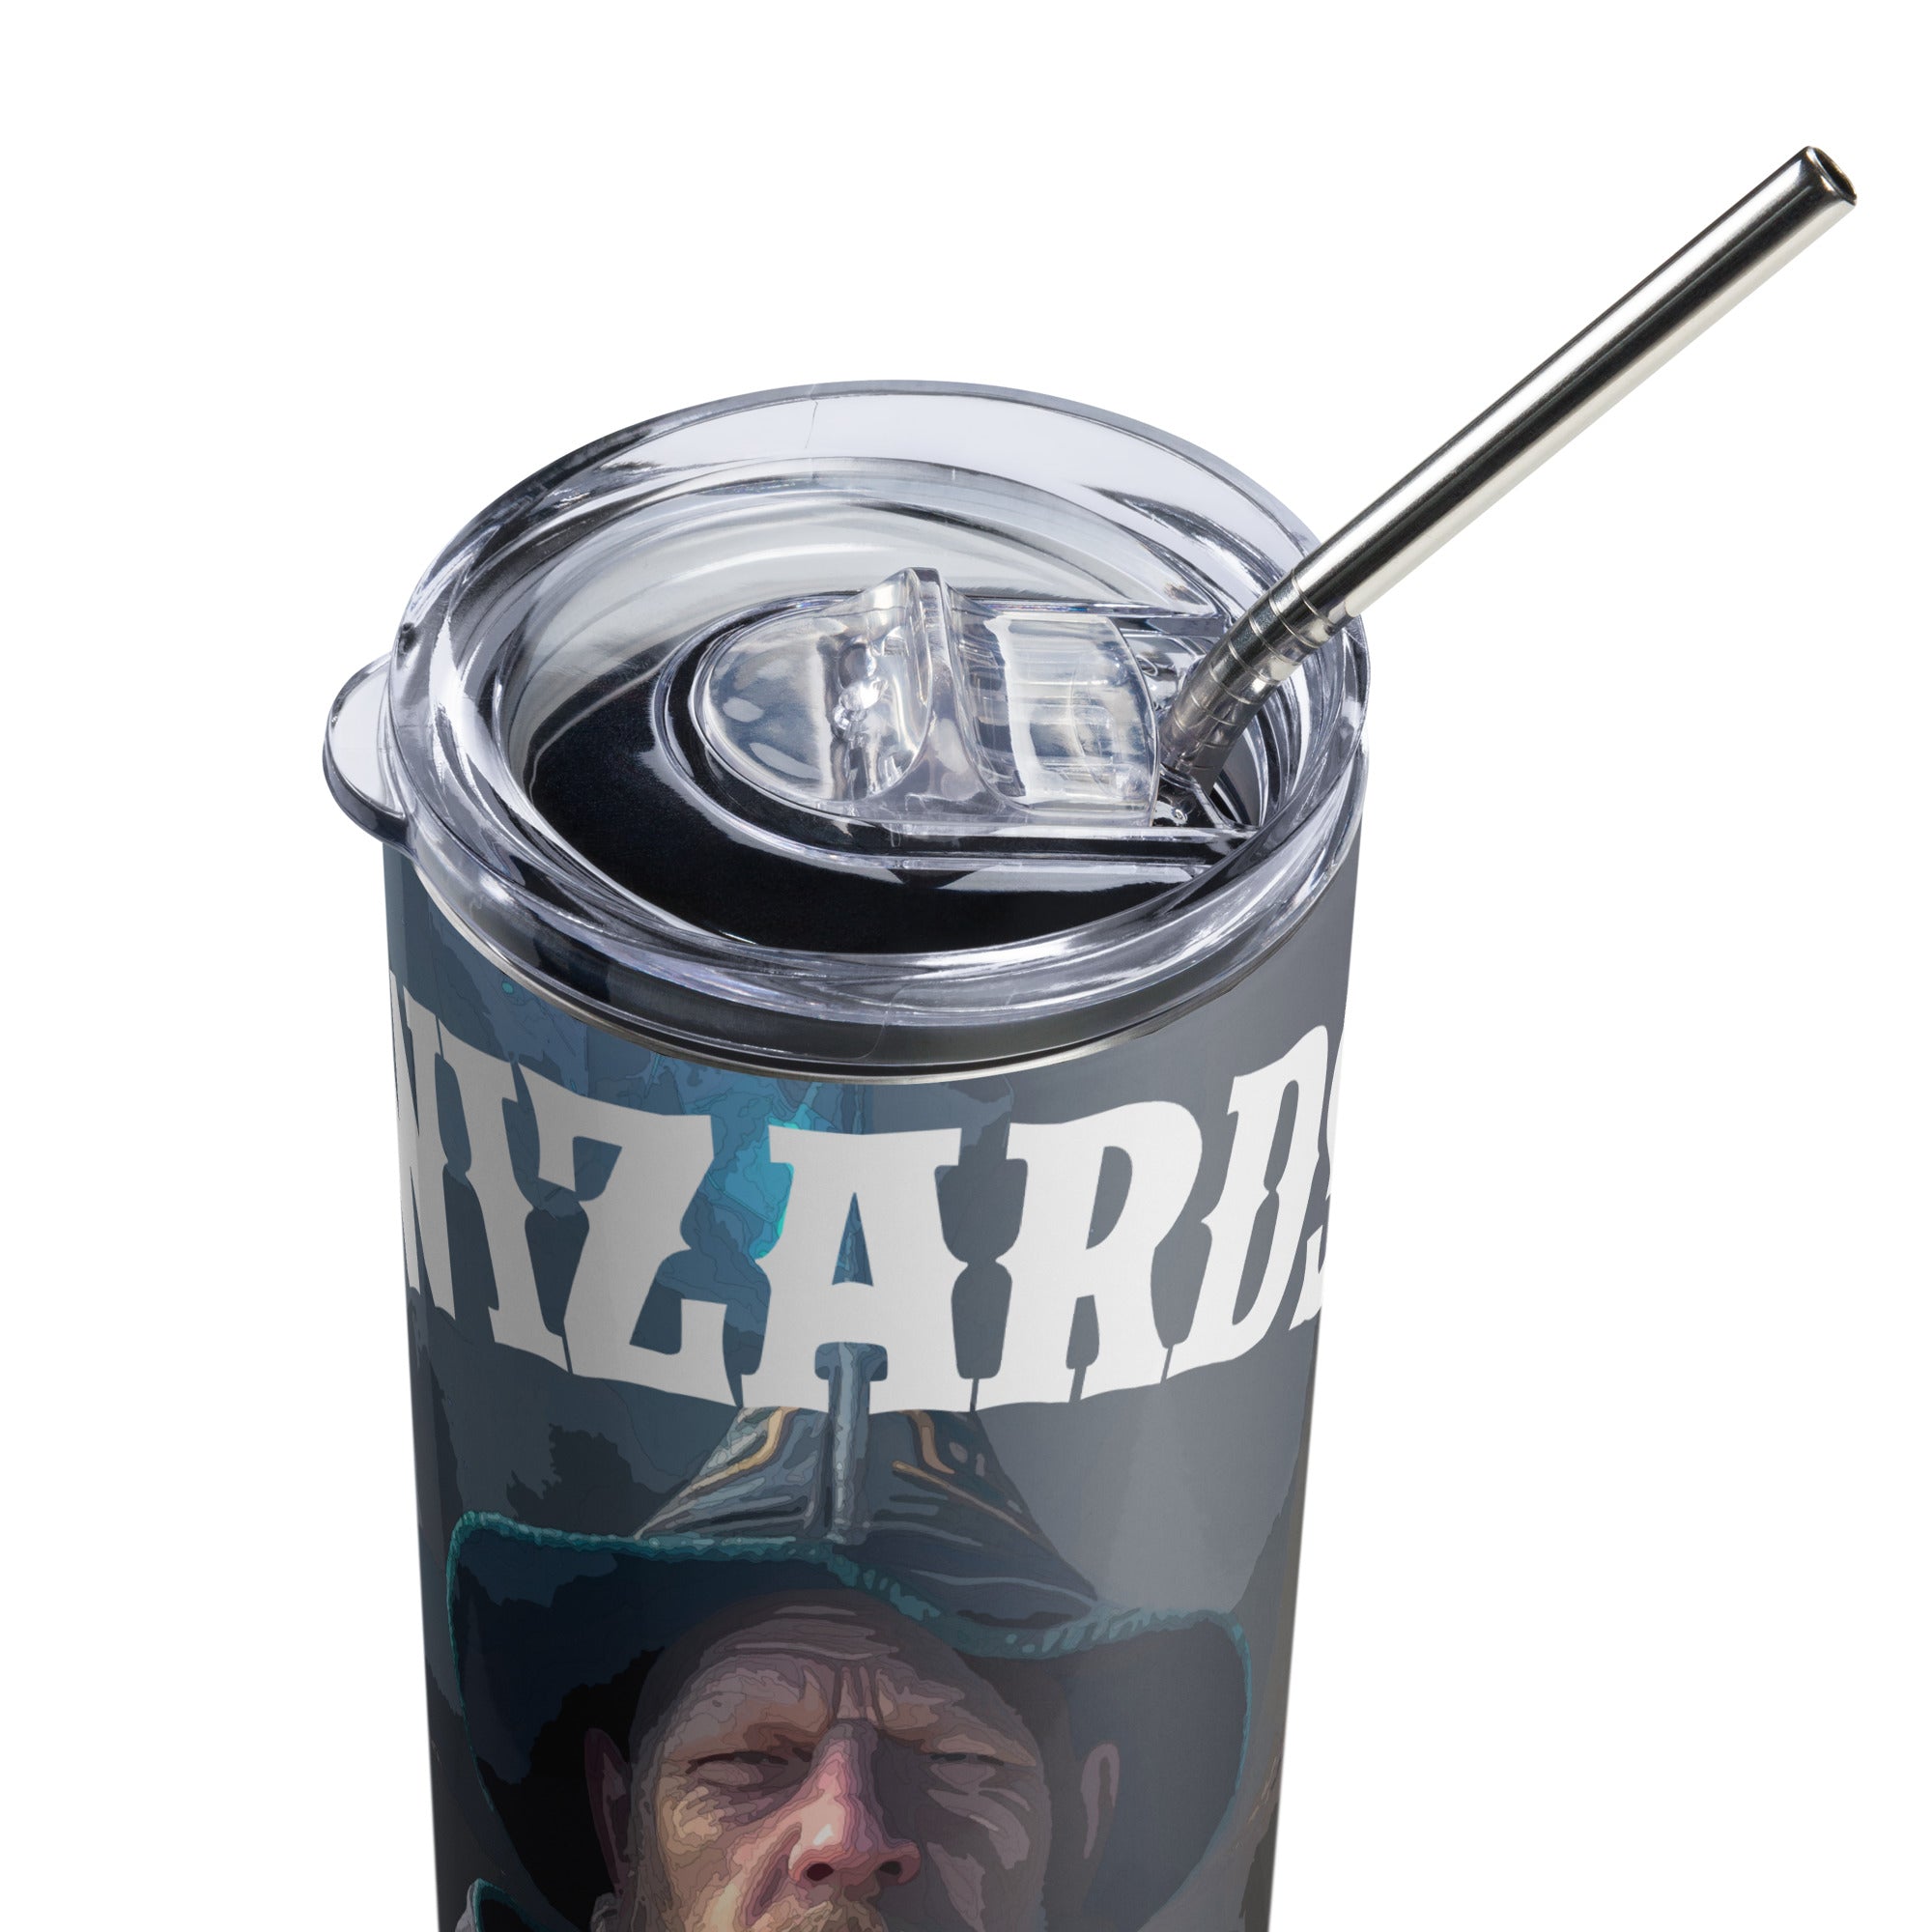 Wizards House of Knowledge Stainless steel tumbler